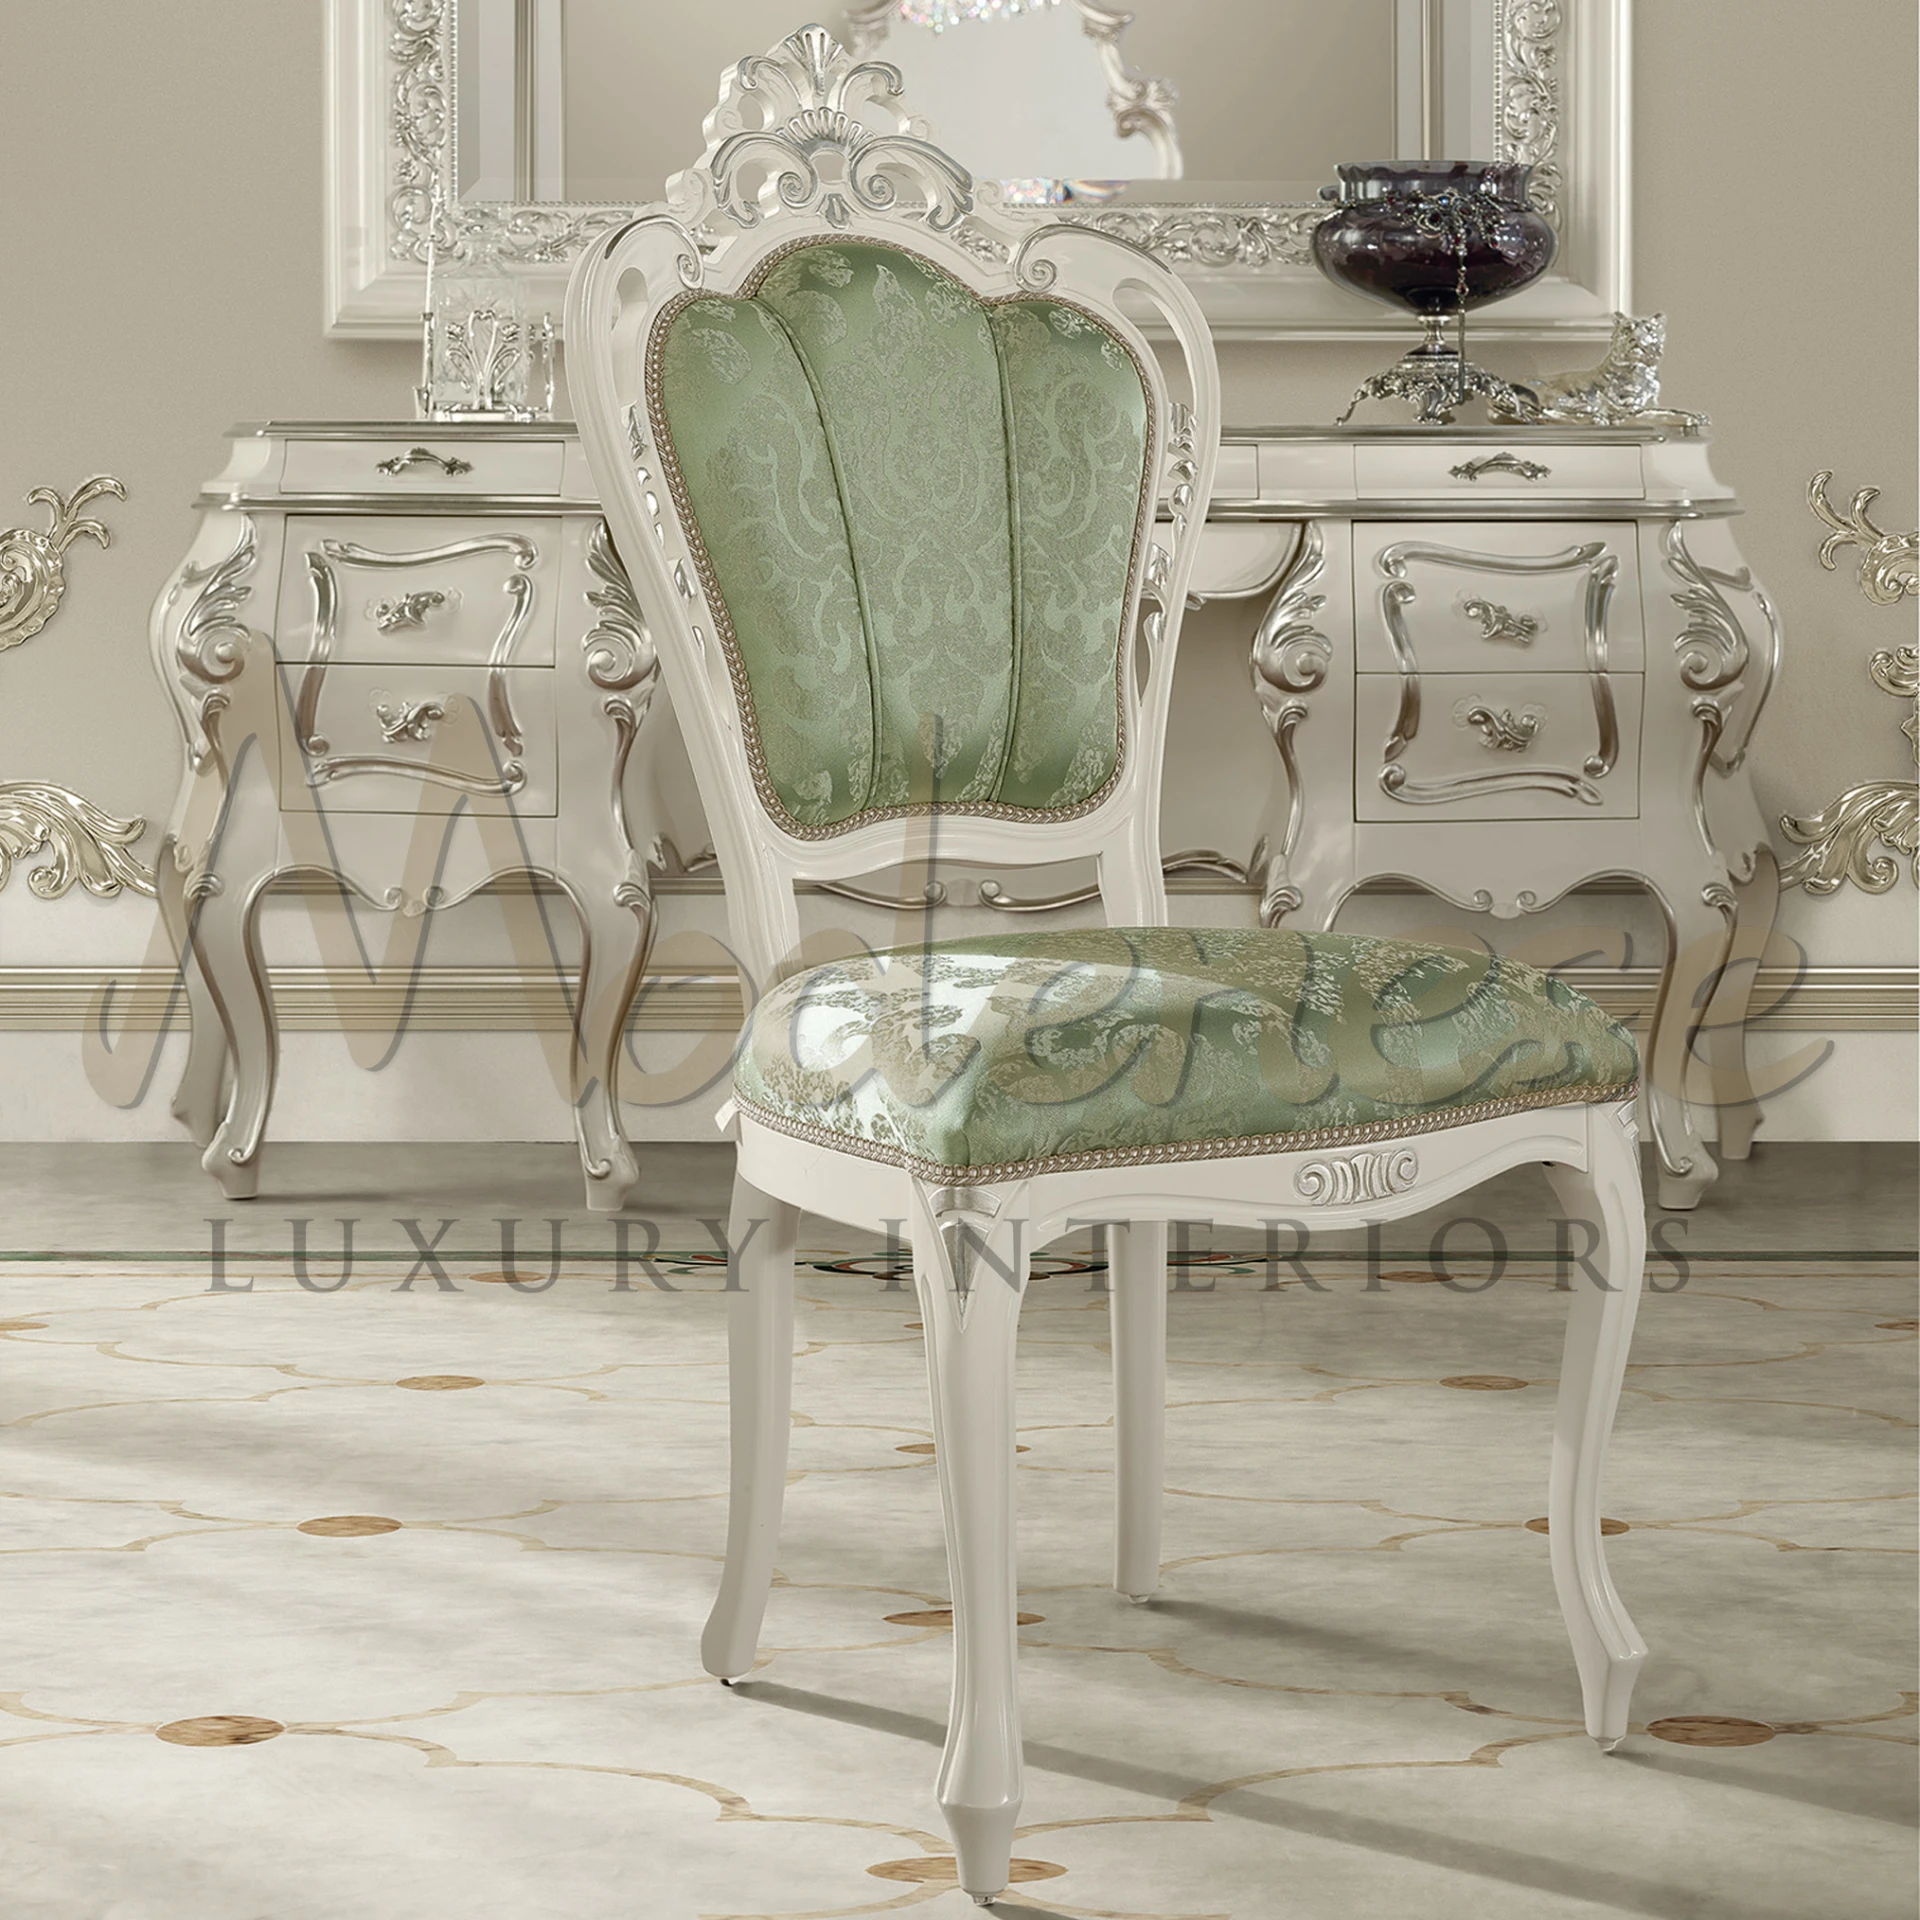 Part of Modenese Furniture's Classic collection, this chair showcases exquisite silver leaf applications, green pattern fabric upholstery, and a curved wooden frame.